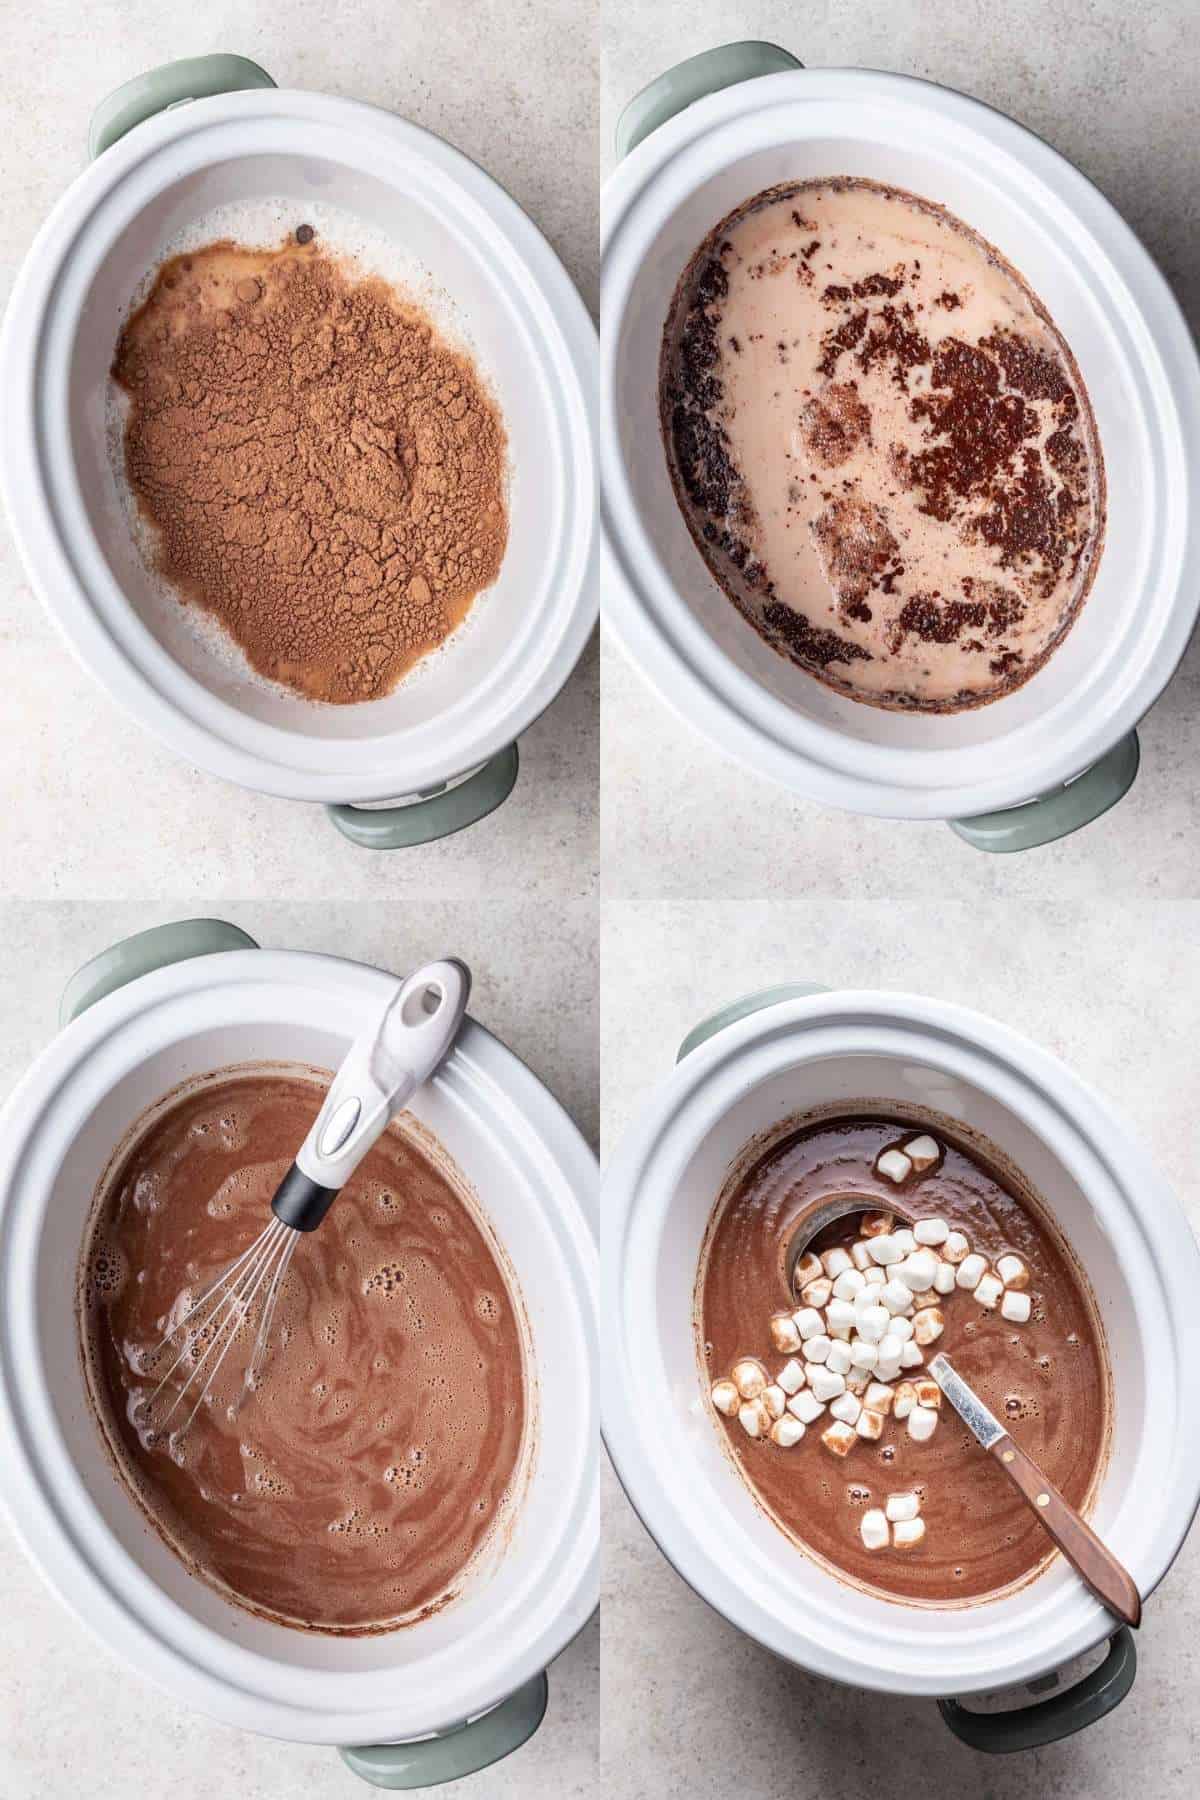 4 images showing step by step process of combining ingredients in crockpot.